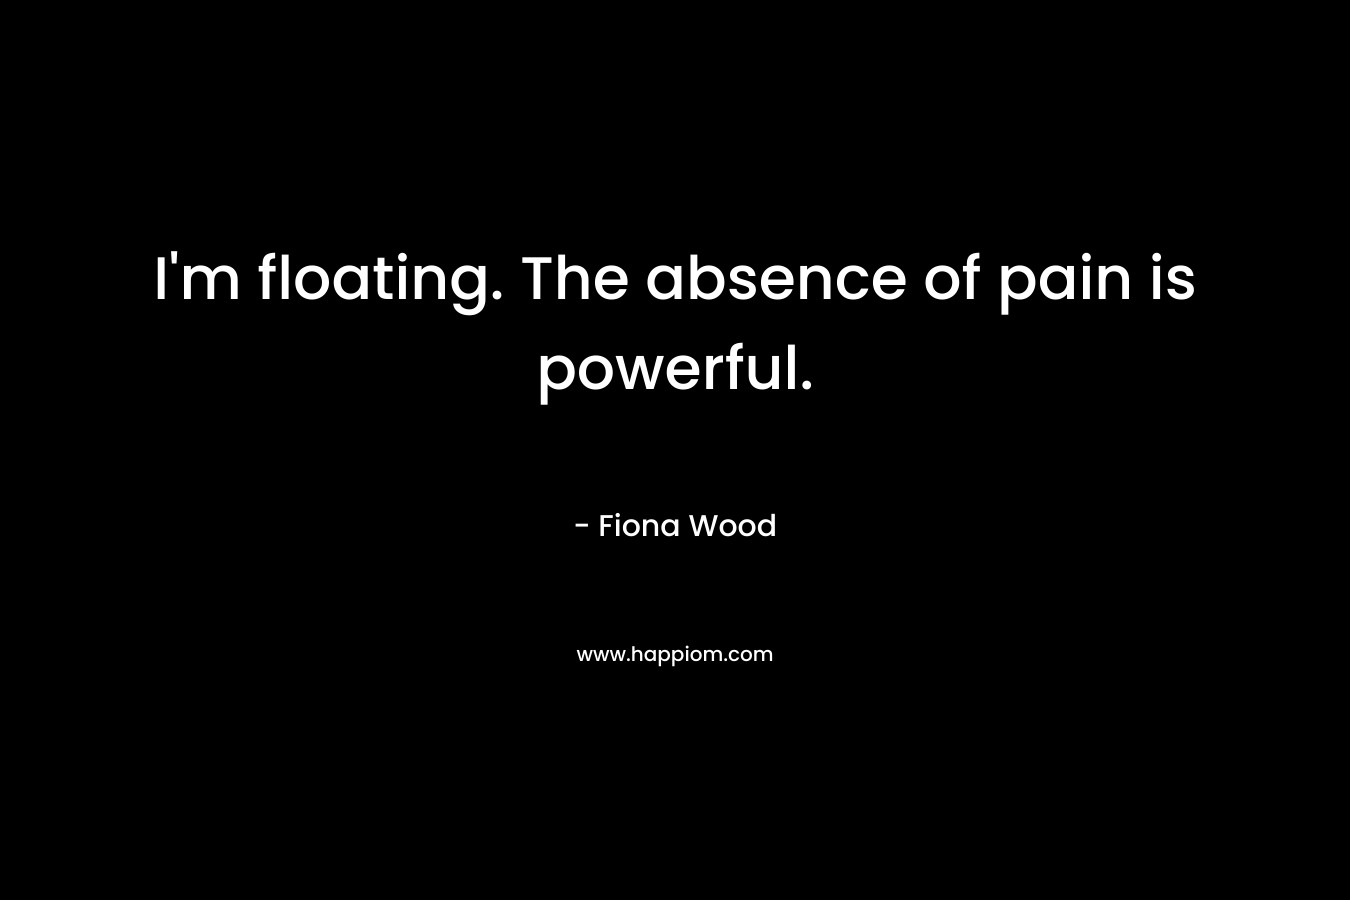 I’m floating. The absence of pain is powerful. – Fiona Wood